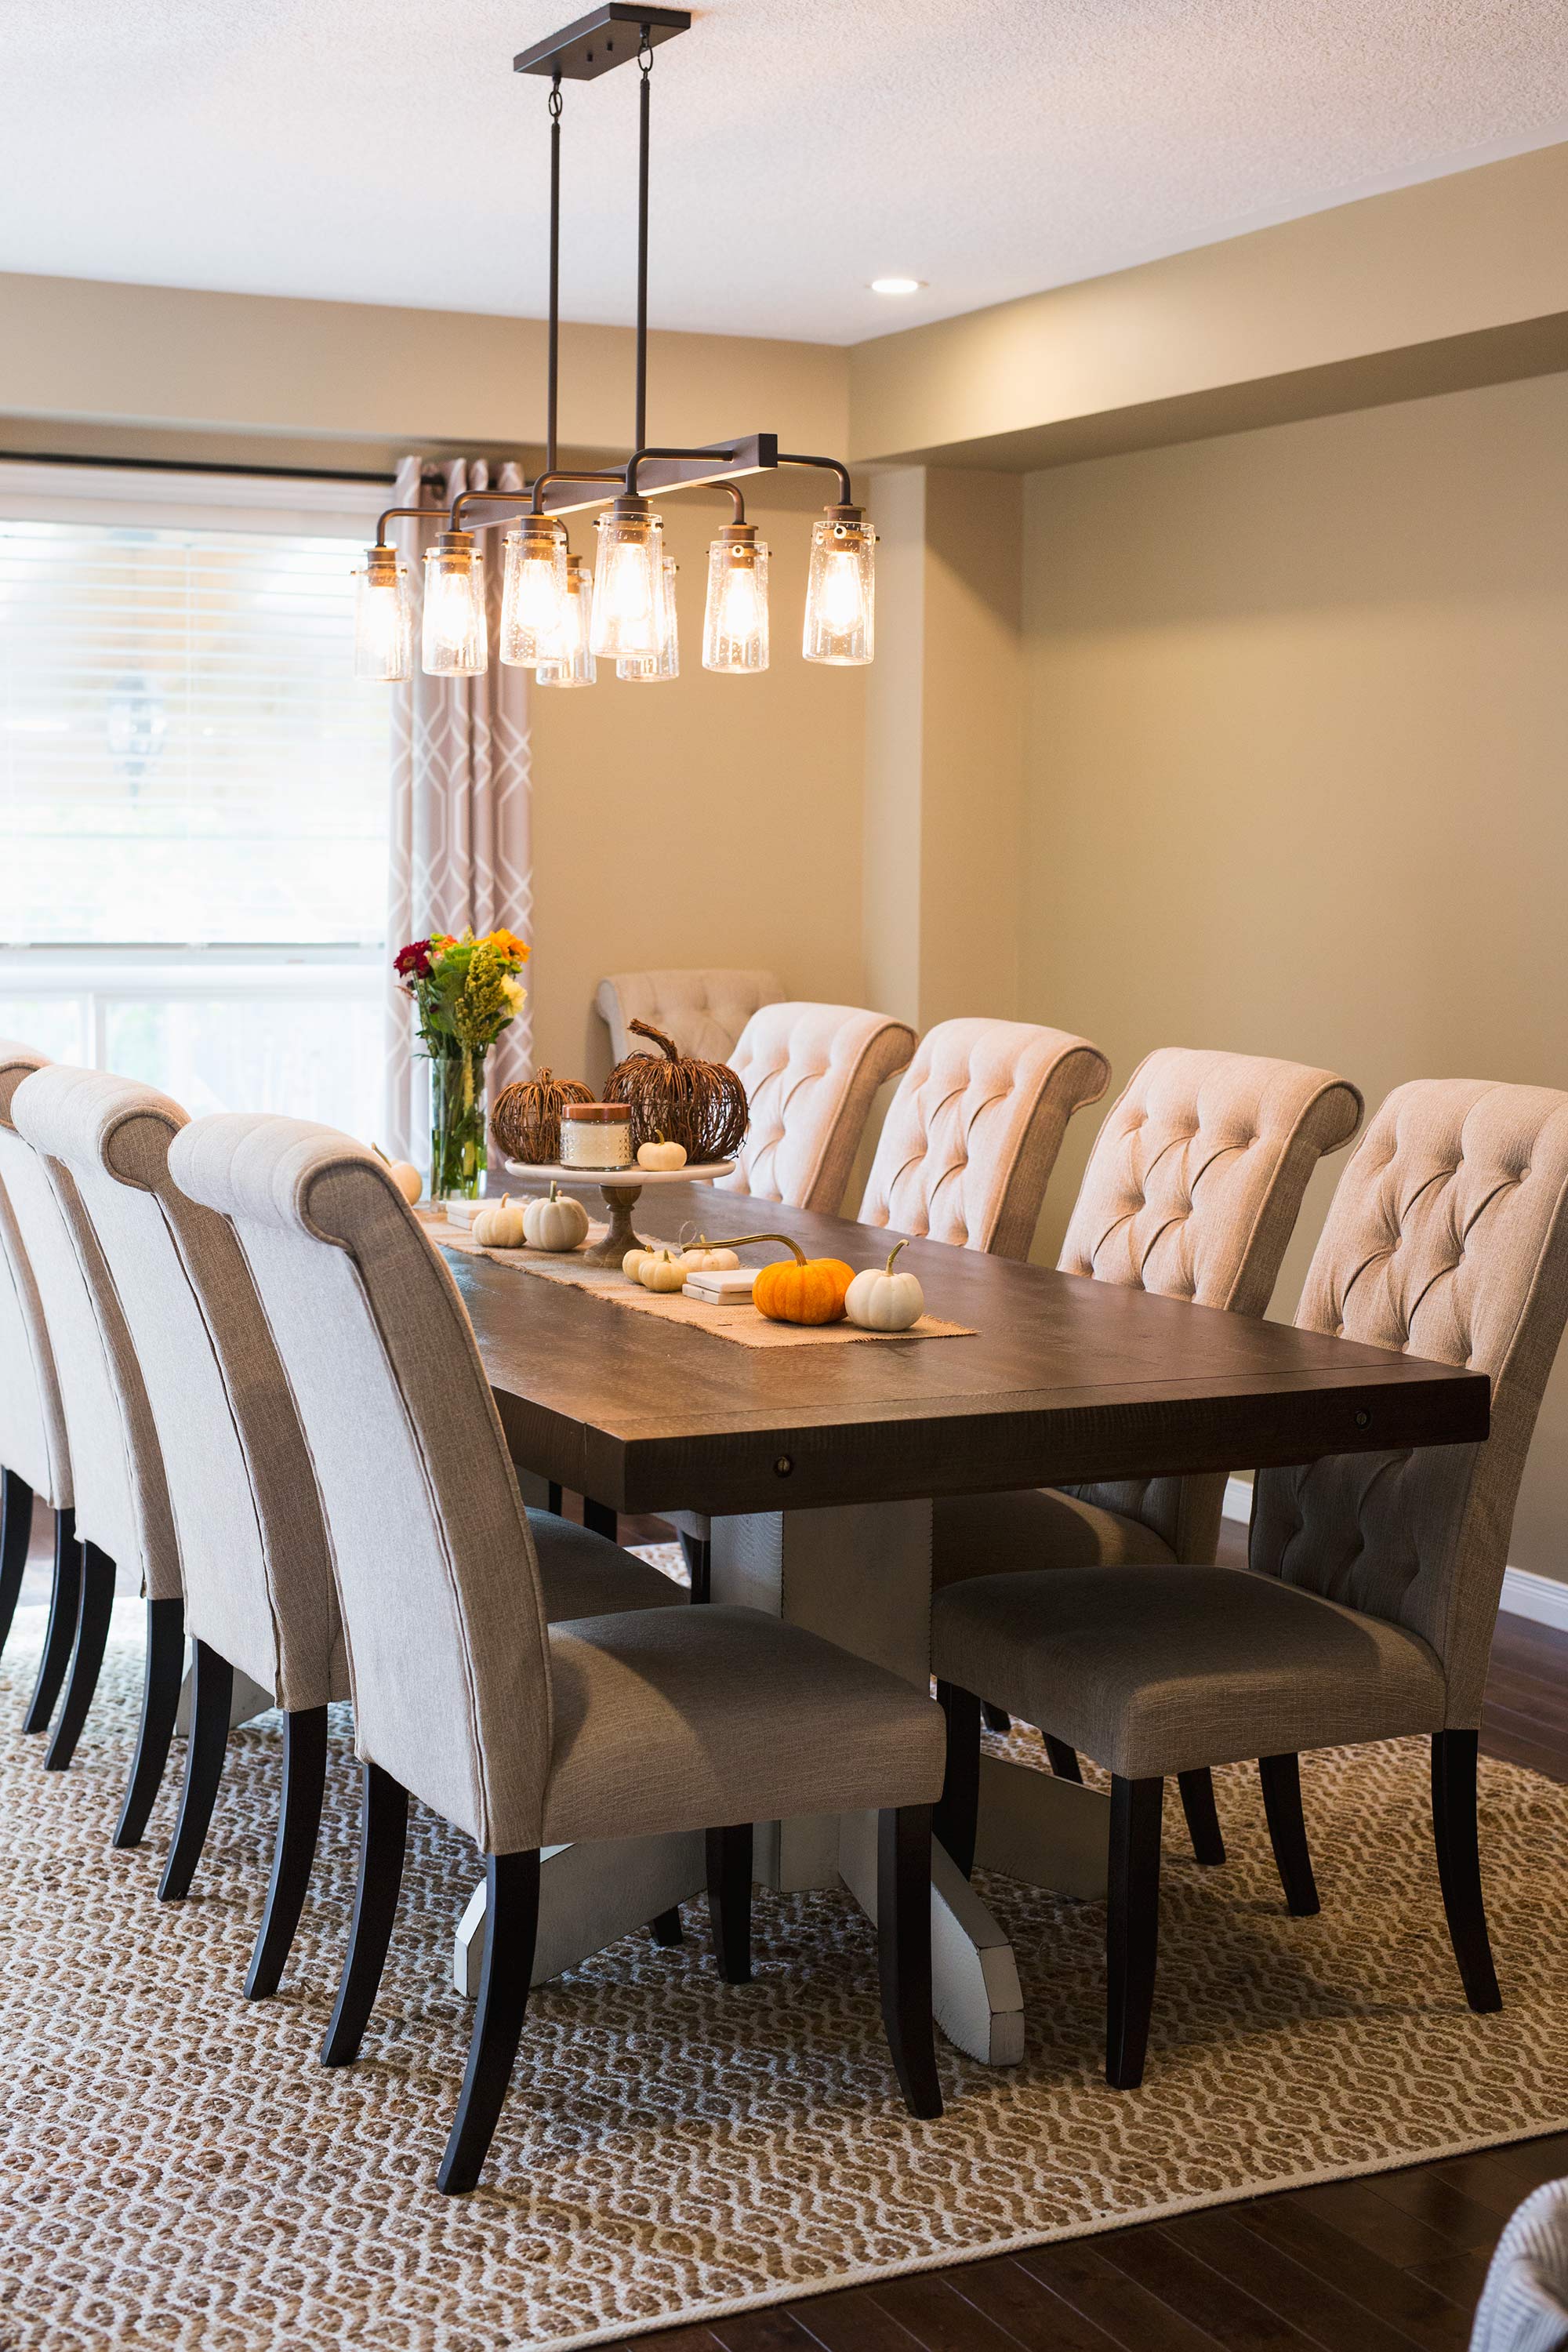 Power Your Reno // Installing a Dining Room Light with an LEC